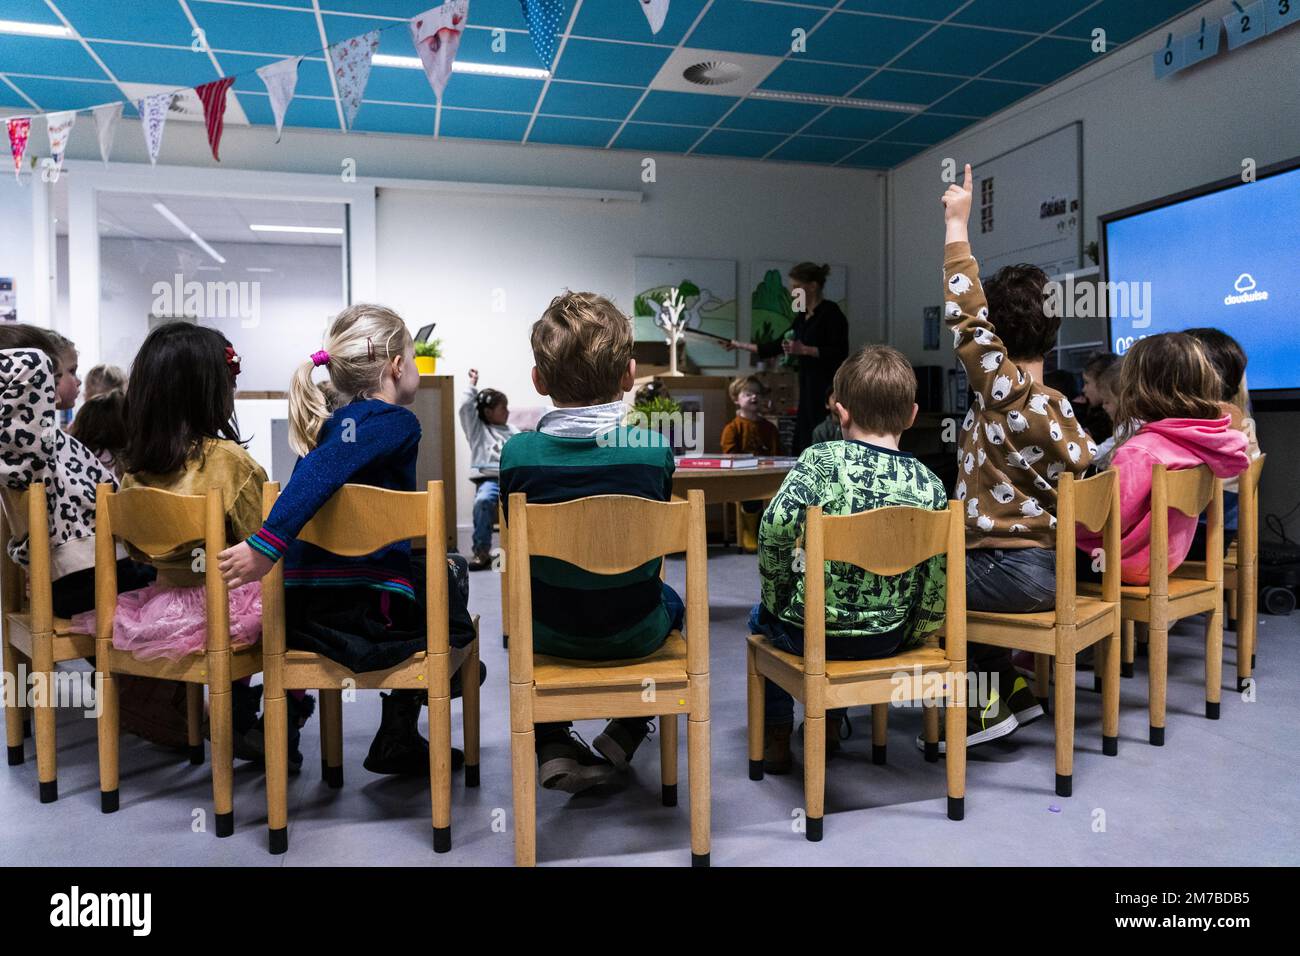 VLEUTEN - Students of primary school Zonneworld during the first day of school in the new year. Primary and secondary schools will start again after the Christmas holidays. ANP JEROEN JUMELET netherlands out - belgium out Stock Photo